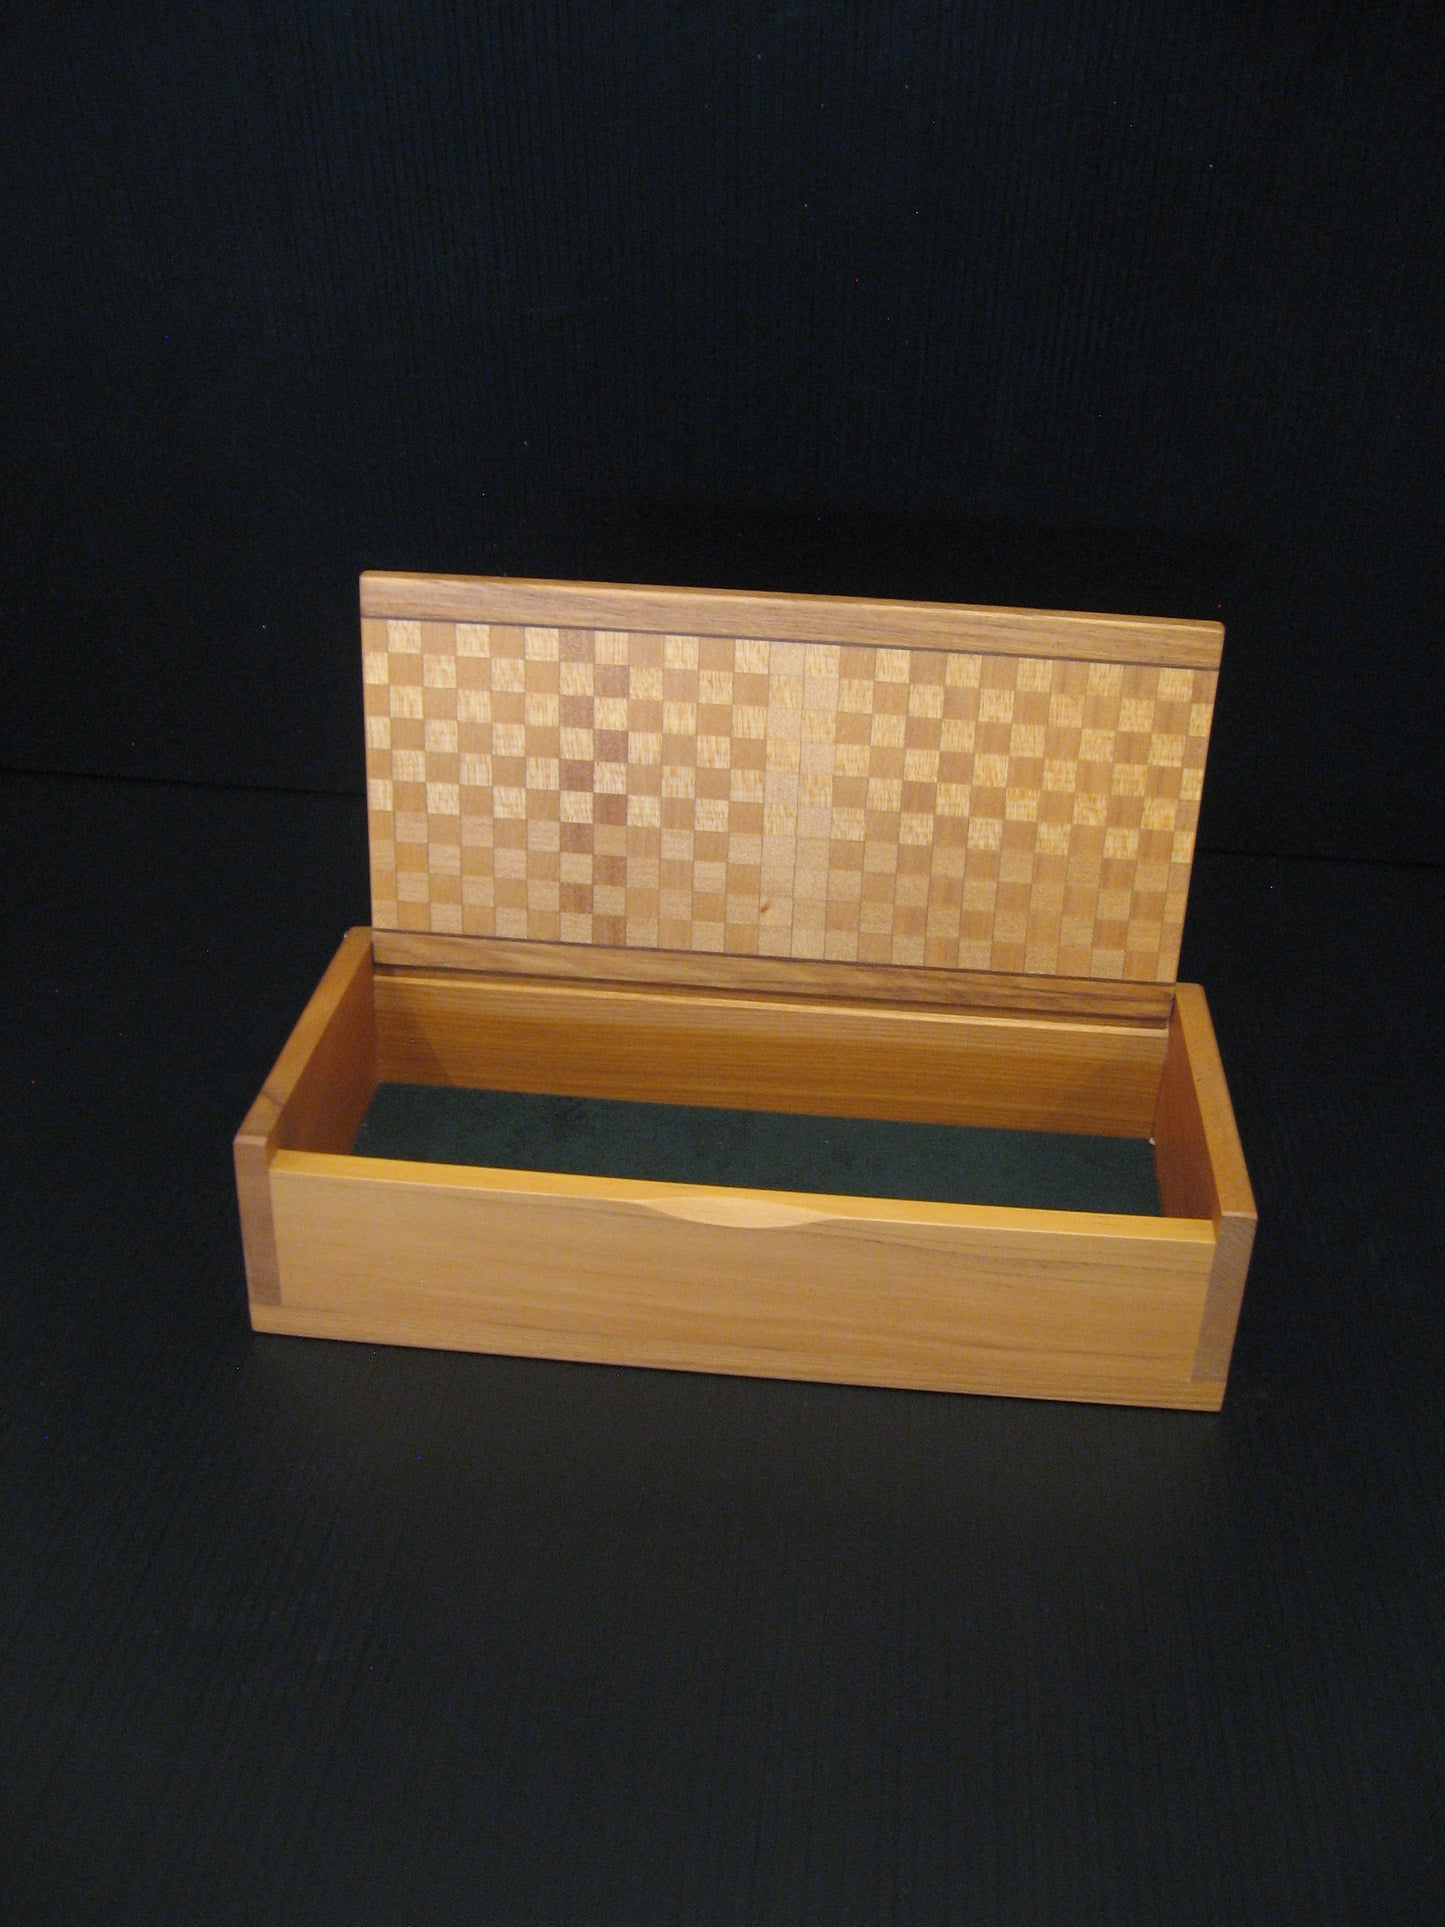 Inside Rimu Patterned Wooden Box by Timber Arts of NZ Silver Fern Gallery